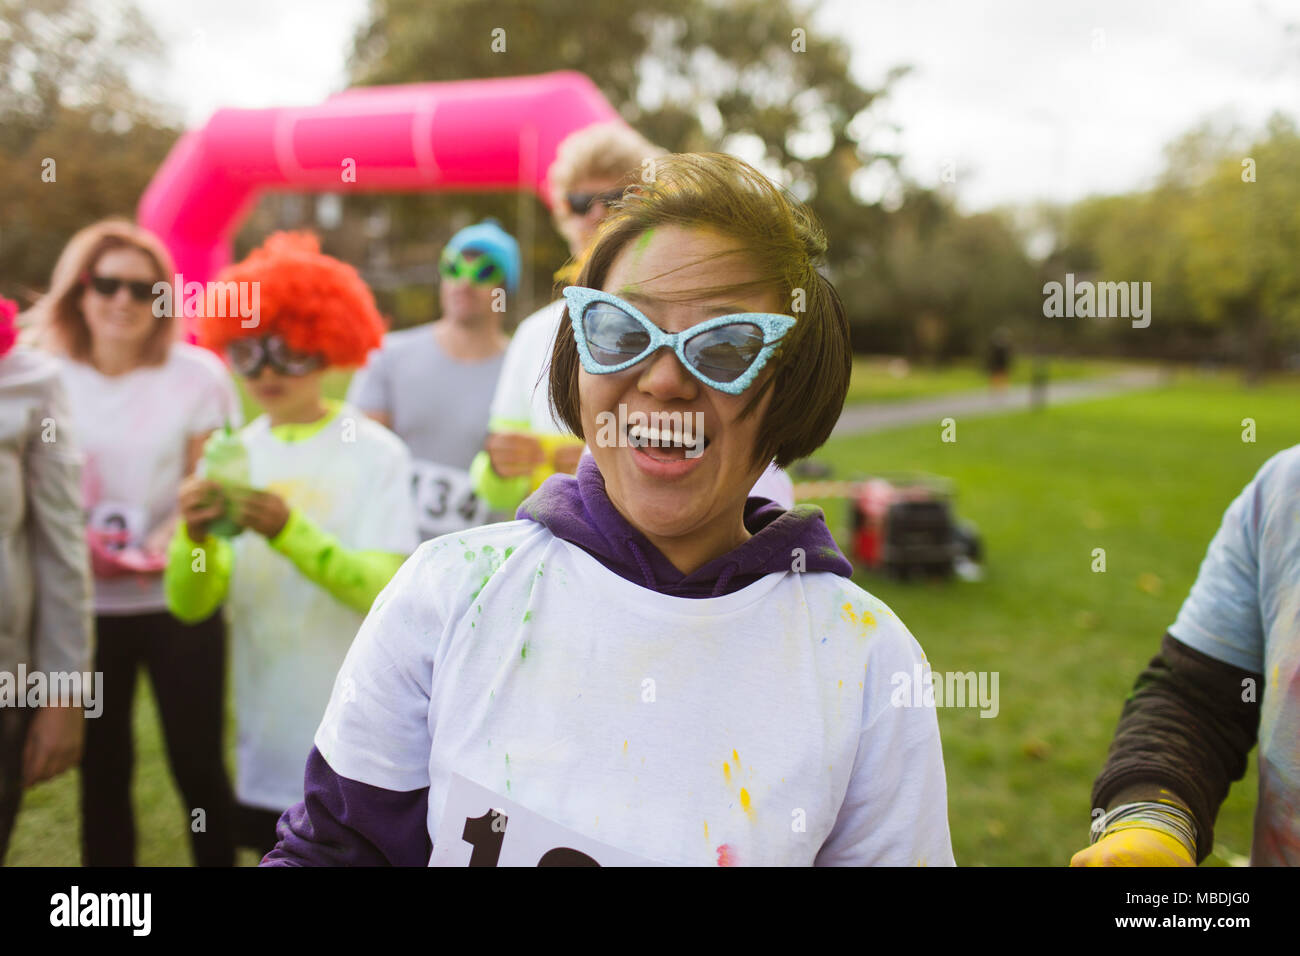 Portrait playful female runner in silly sunglasses at charity run in park Stock Photo